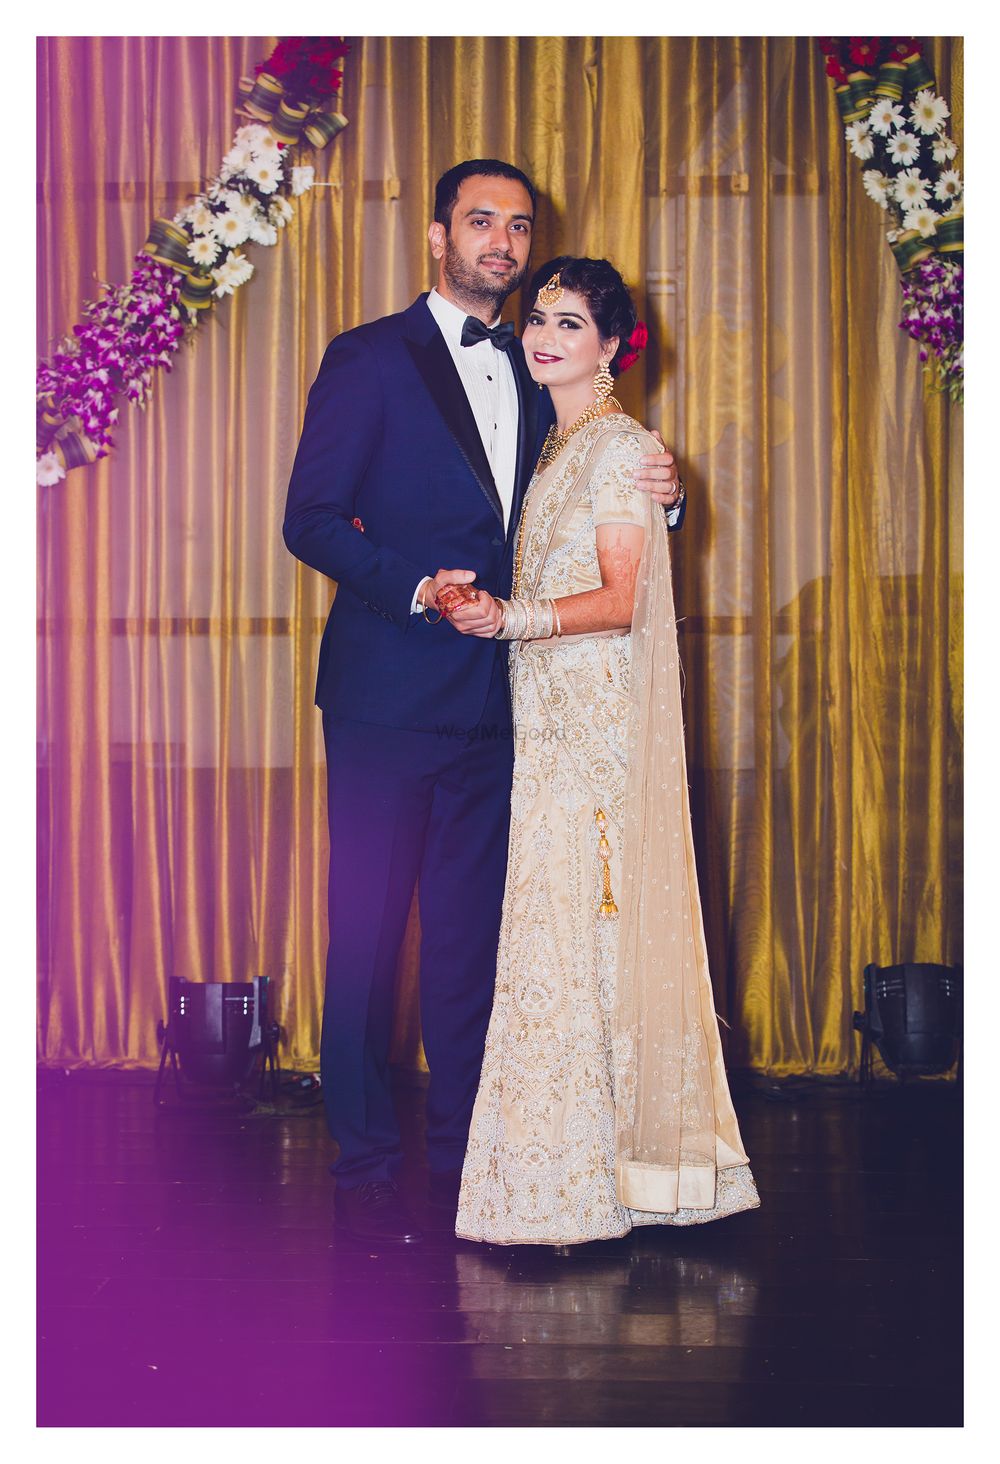 Photo From Richa + Amarinder - By Memoirs of Wedlock